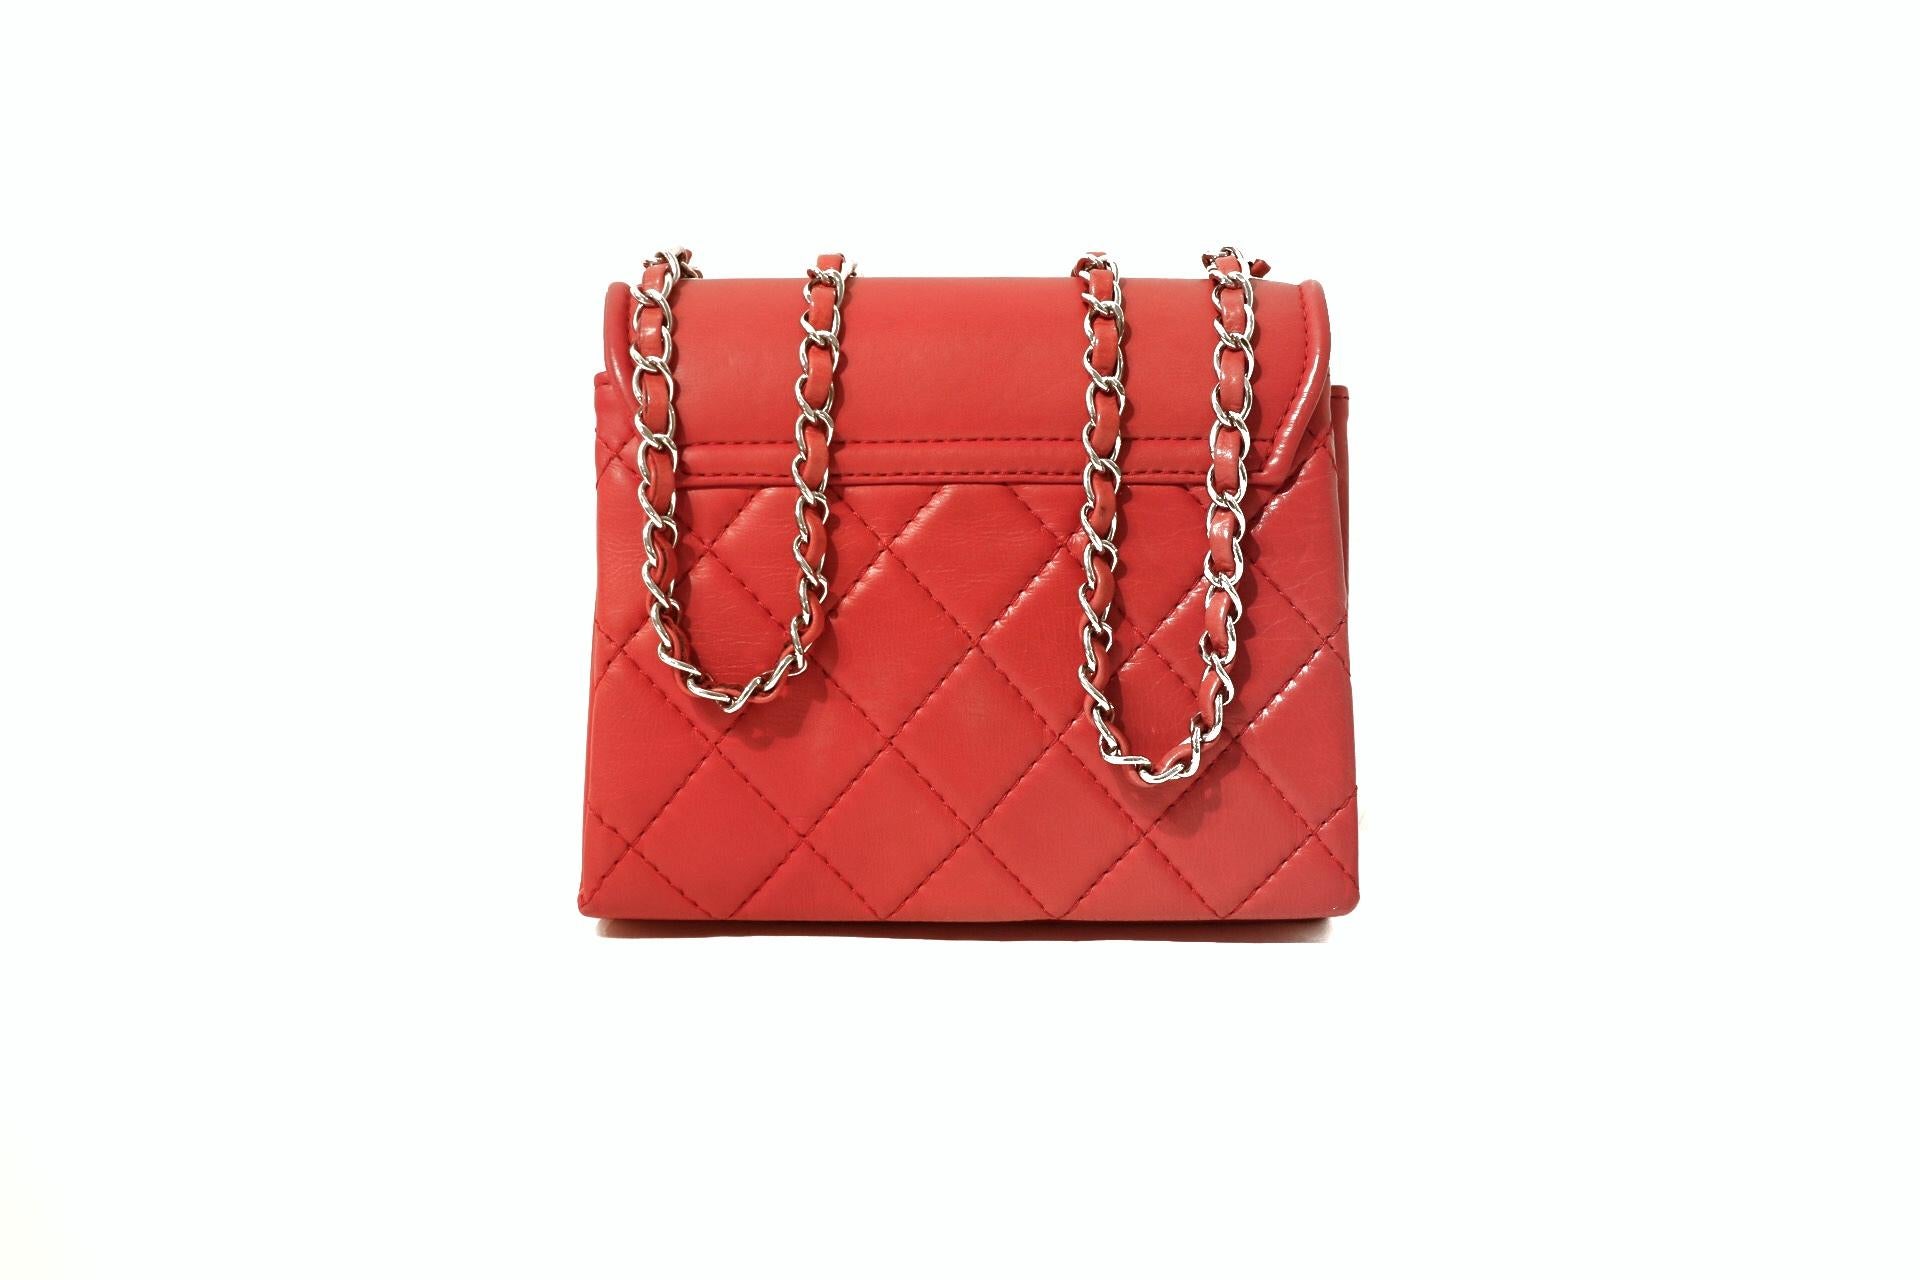 This authentic Chanel Red Leather Double Gusset Flap Bag is in pristine condition.  Small but mighty, the vibrant color and simple design makes this a brilliant addition to any collection. 

Lipstick red lambskin is stitched in signature Chanel